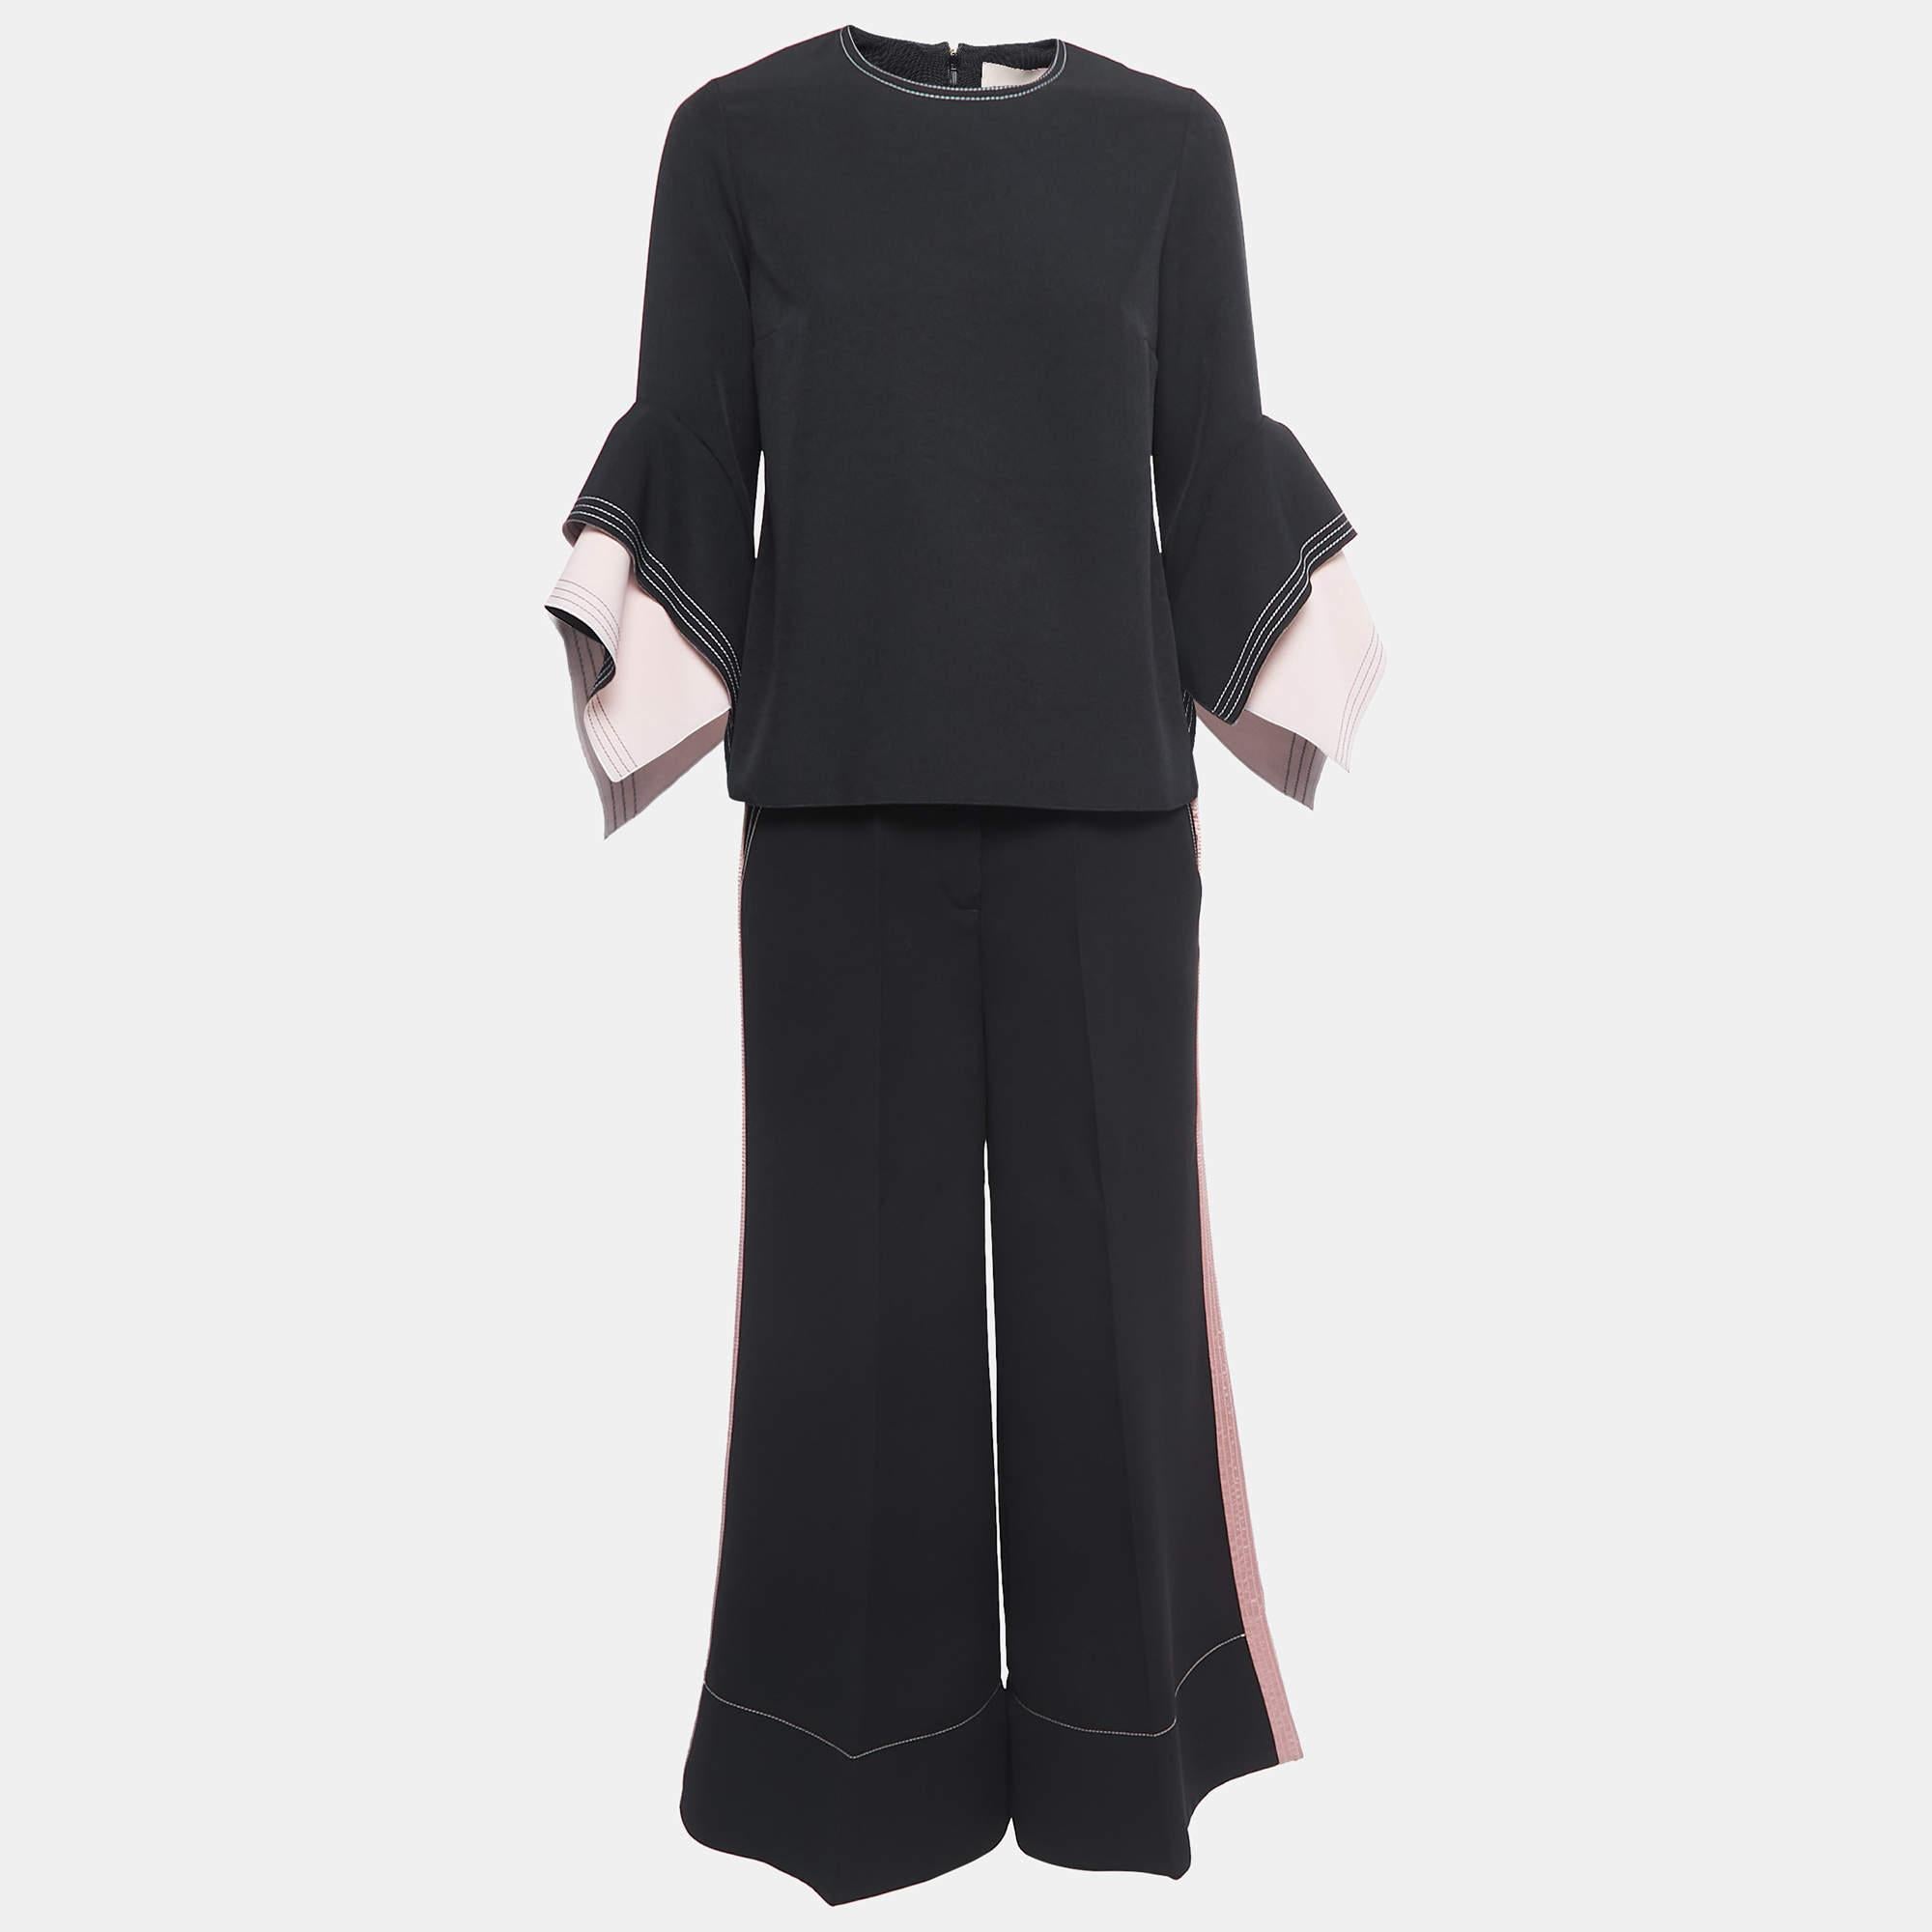 Characterized by impeccable tailoring, a good fit, and the use of quality materials, this pant and top set will help you serve chic looks. Style it with heels or boots to bring out the stylish appeal of the creation.

